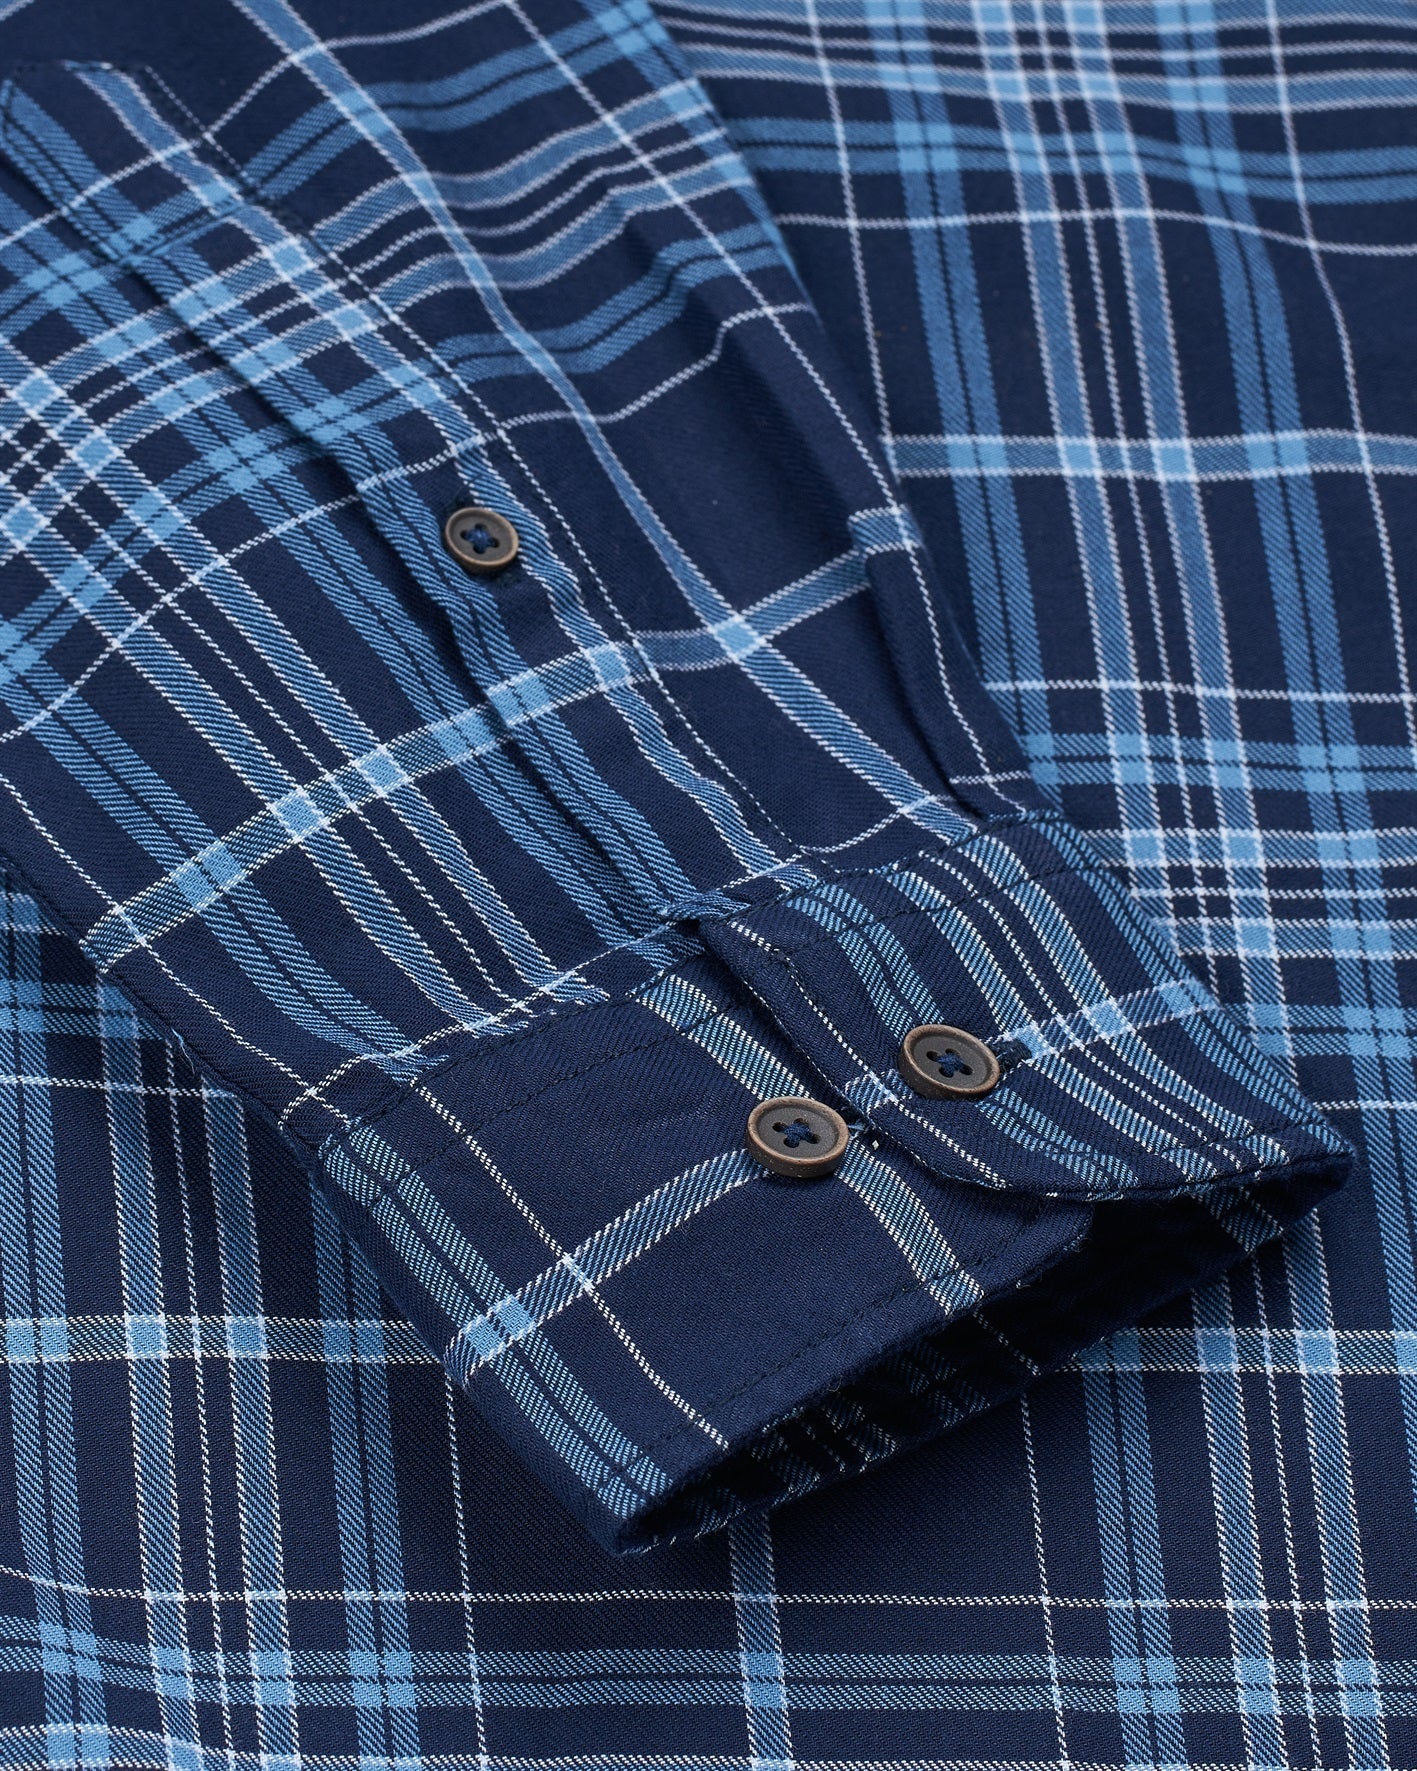 Bare Brown Cotton Check Shirt, Slim Fit with Full Sleeves - Navy